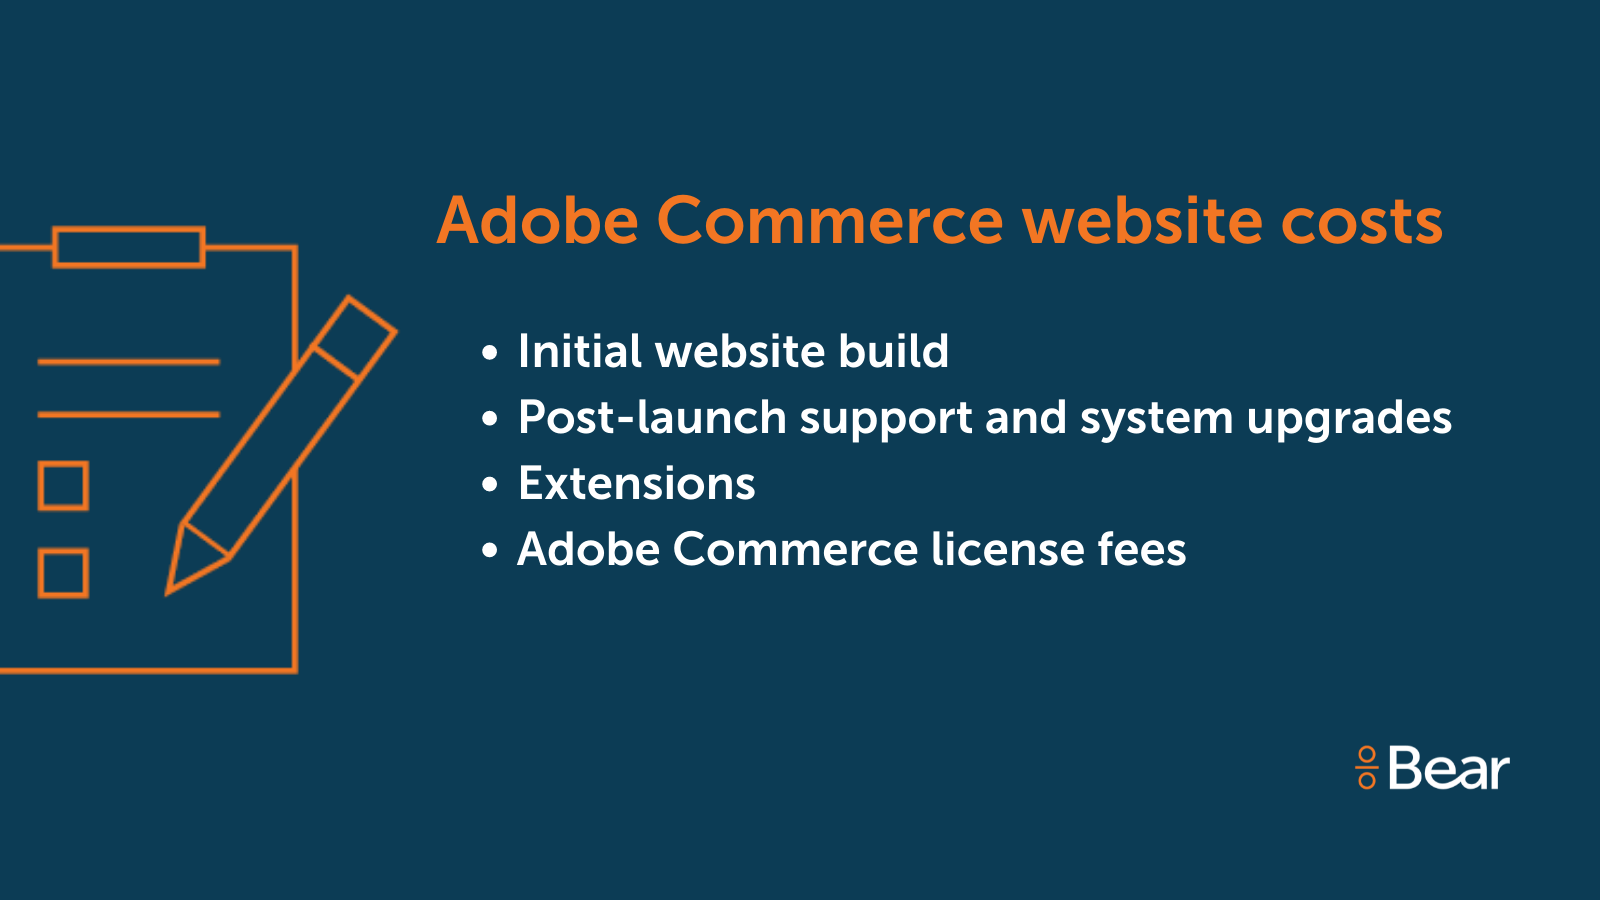 Adobe Commerce website cost breakdown: website build, post-launch support system, extensions, license fees